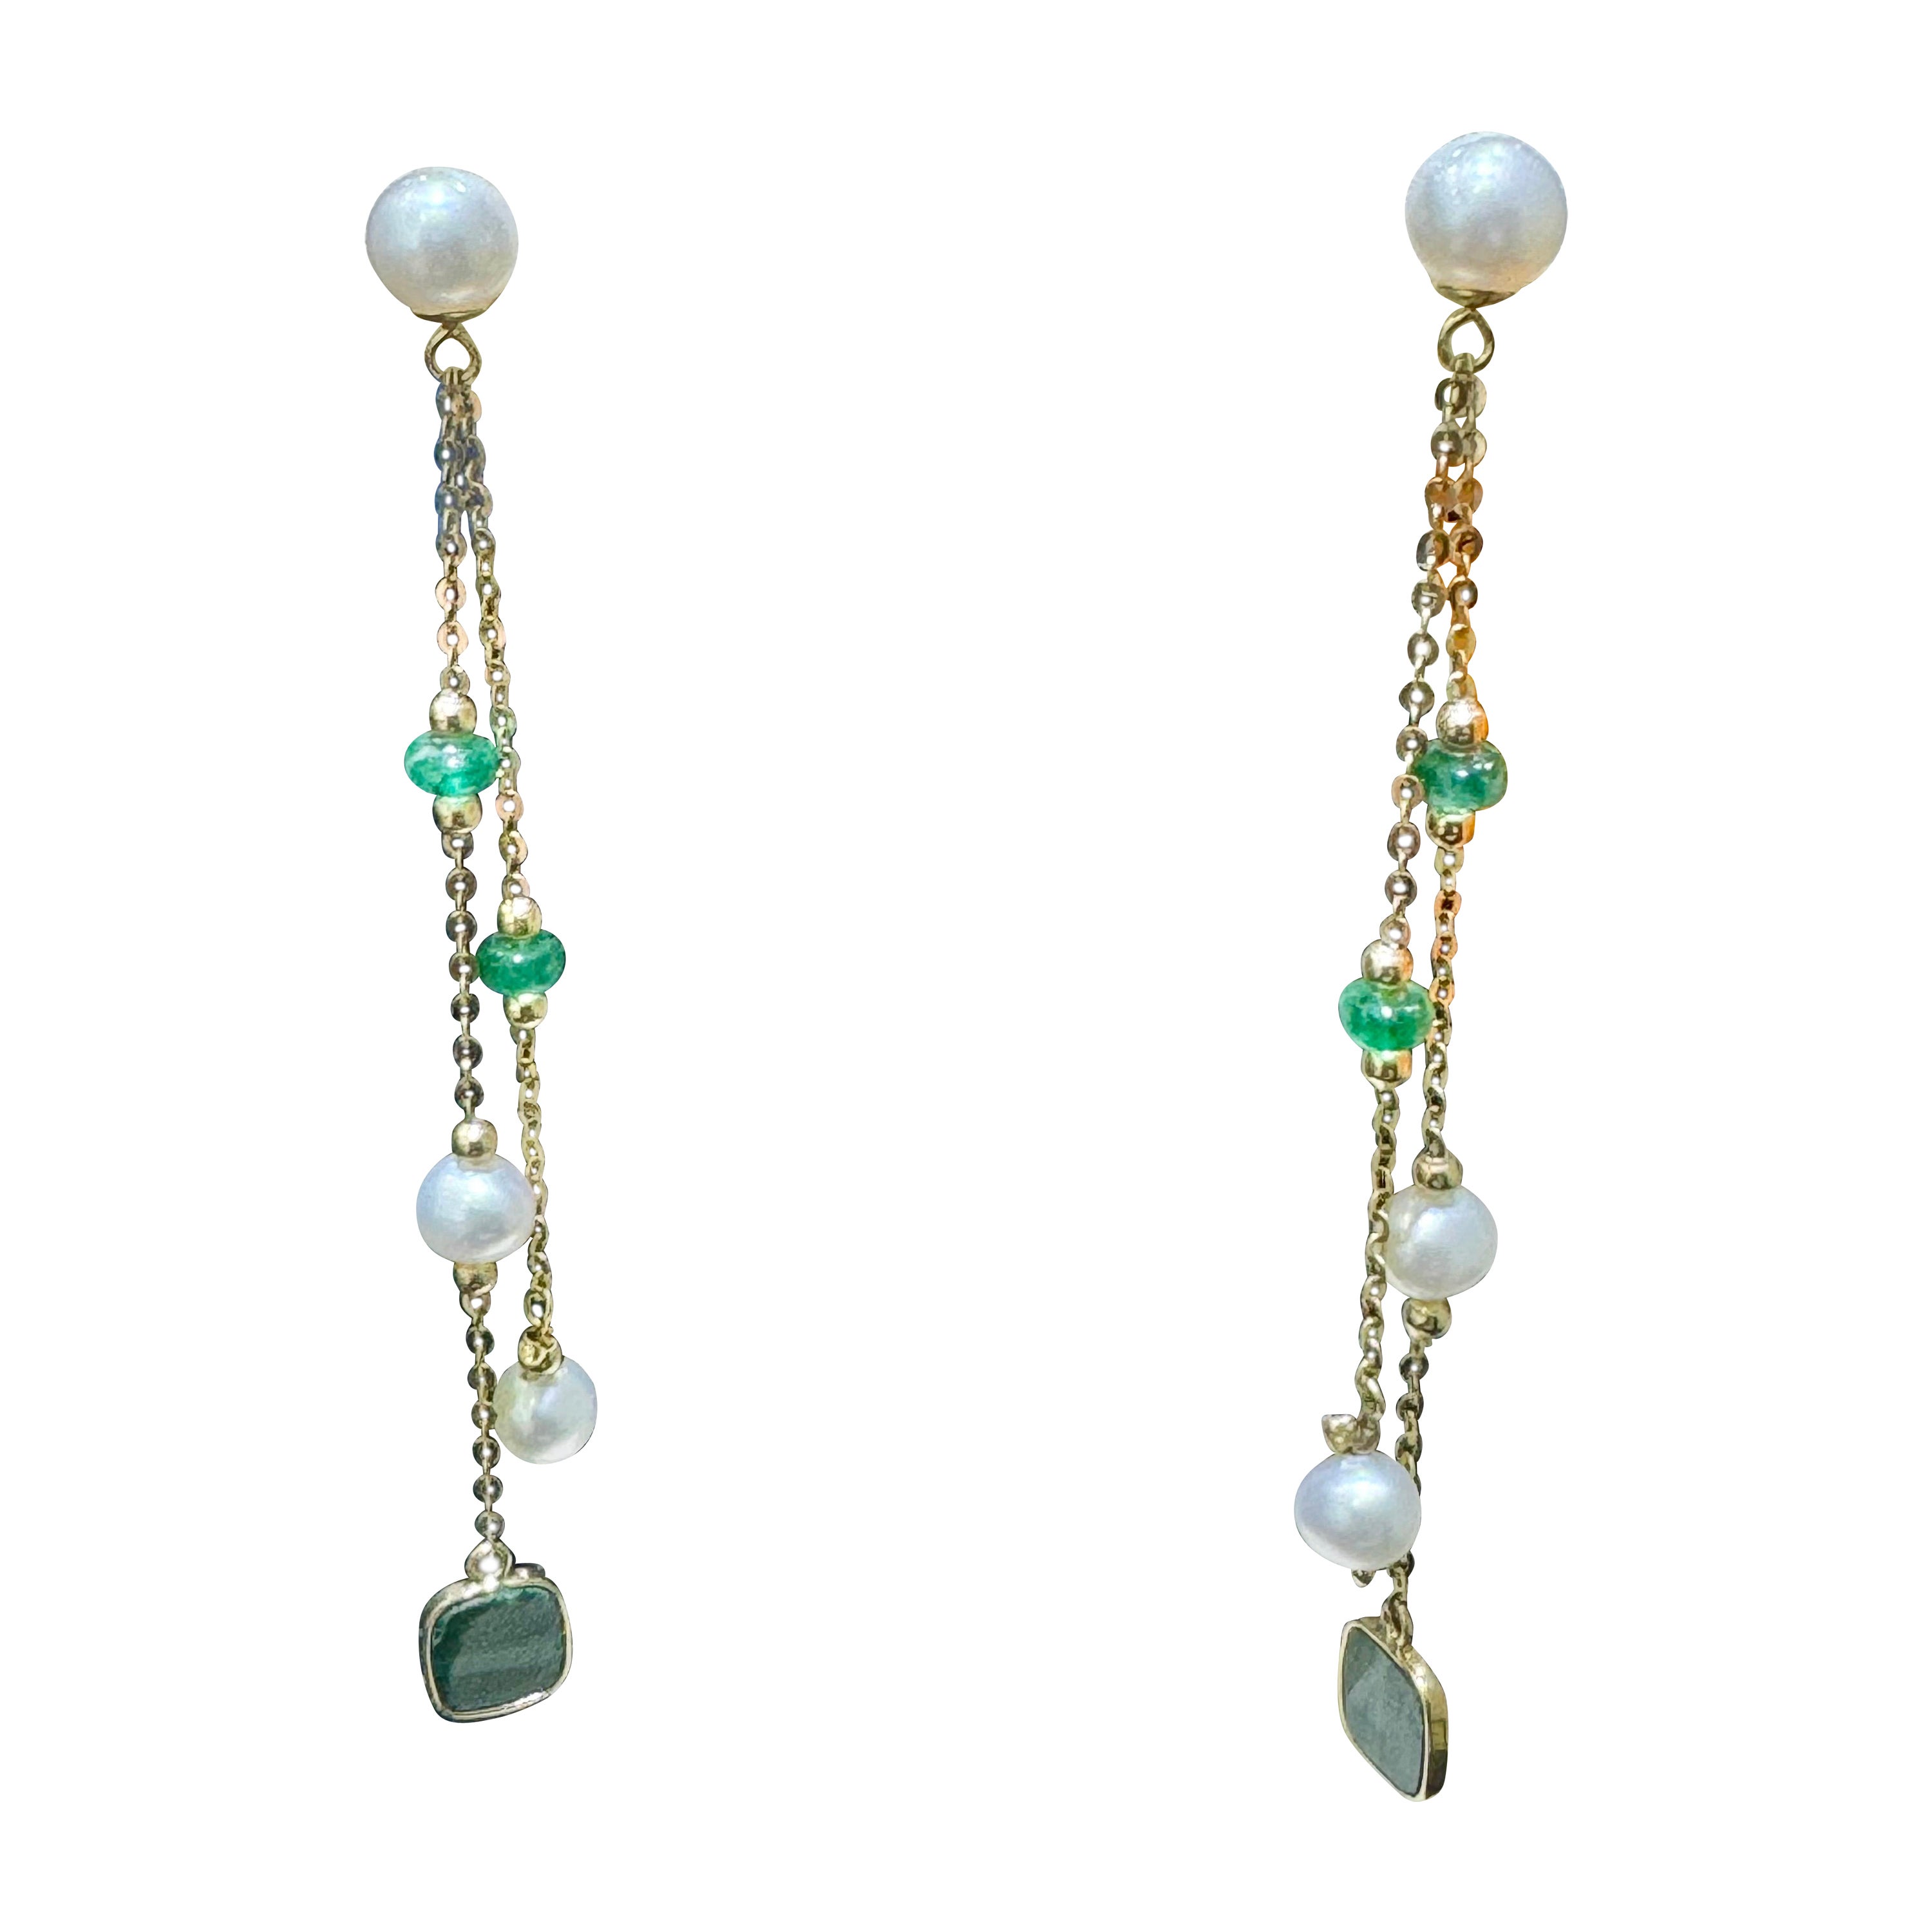 Beautiful Effy Emerald, Pearl And Malachite Earrings In 14k For Sale